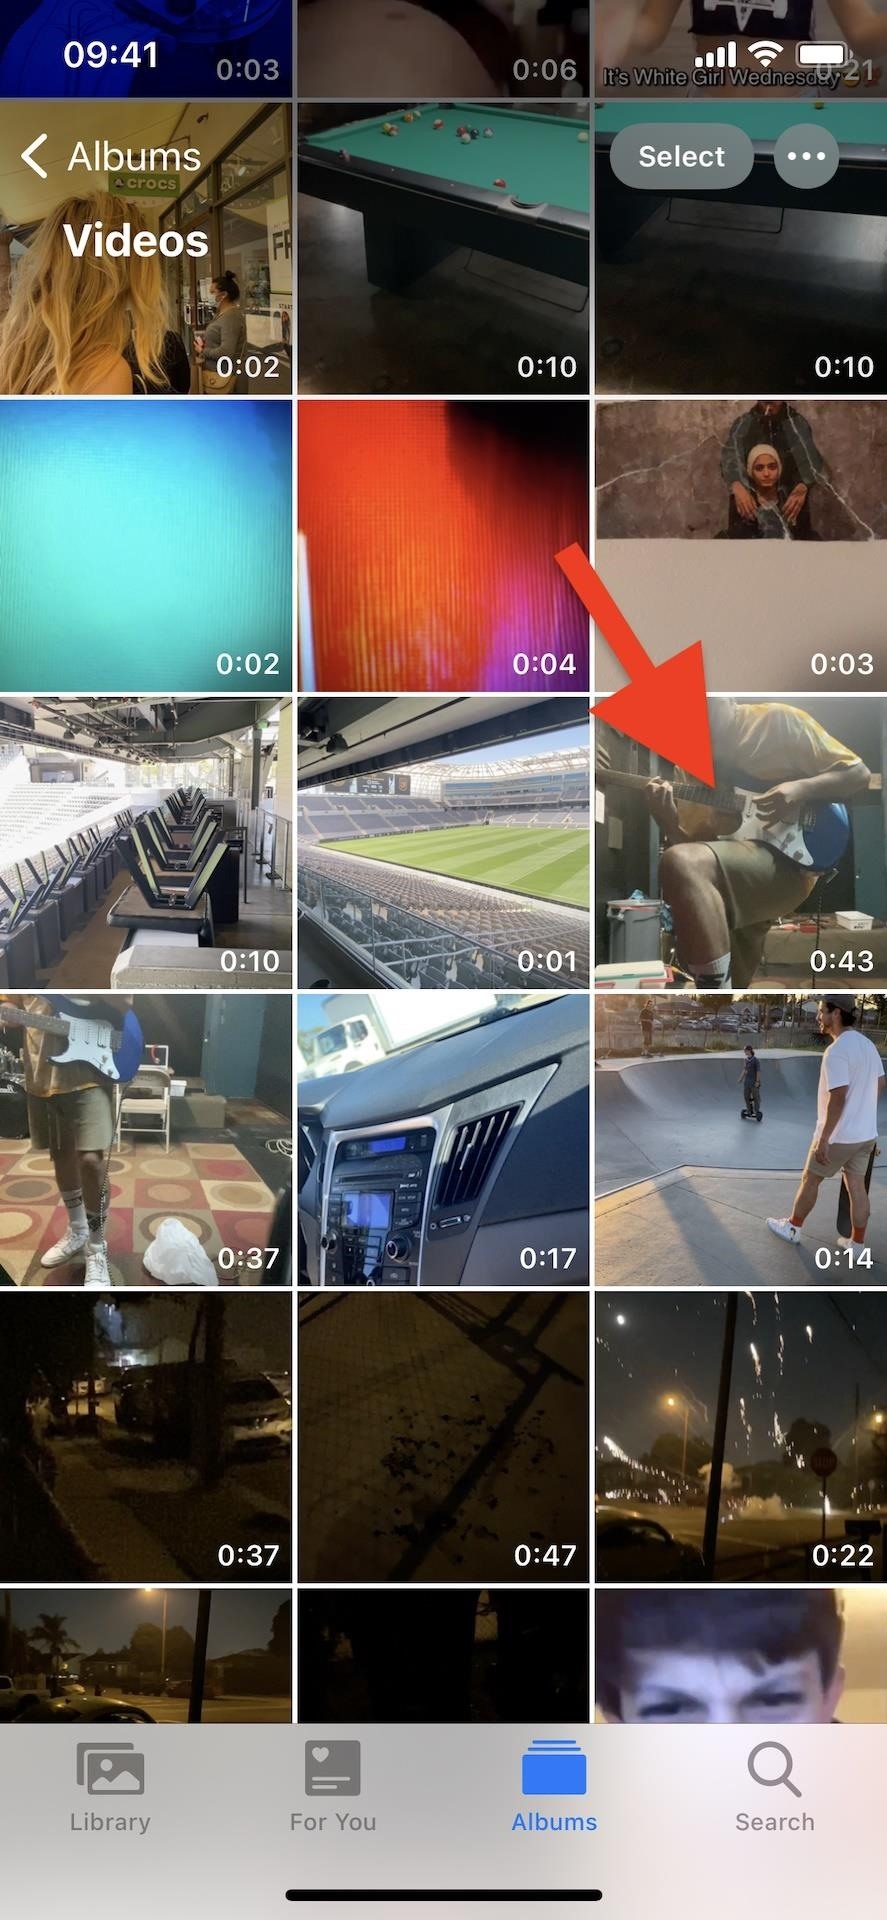 Quickly Remove Audio Tracks from Any Video on Your iPhone - Right from the Share Sheet